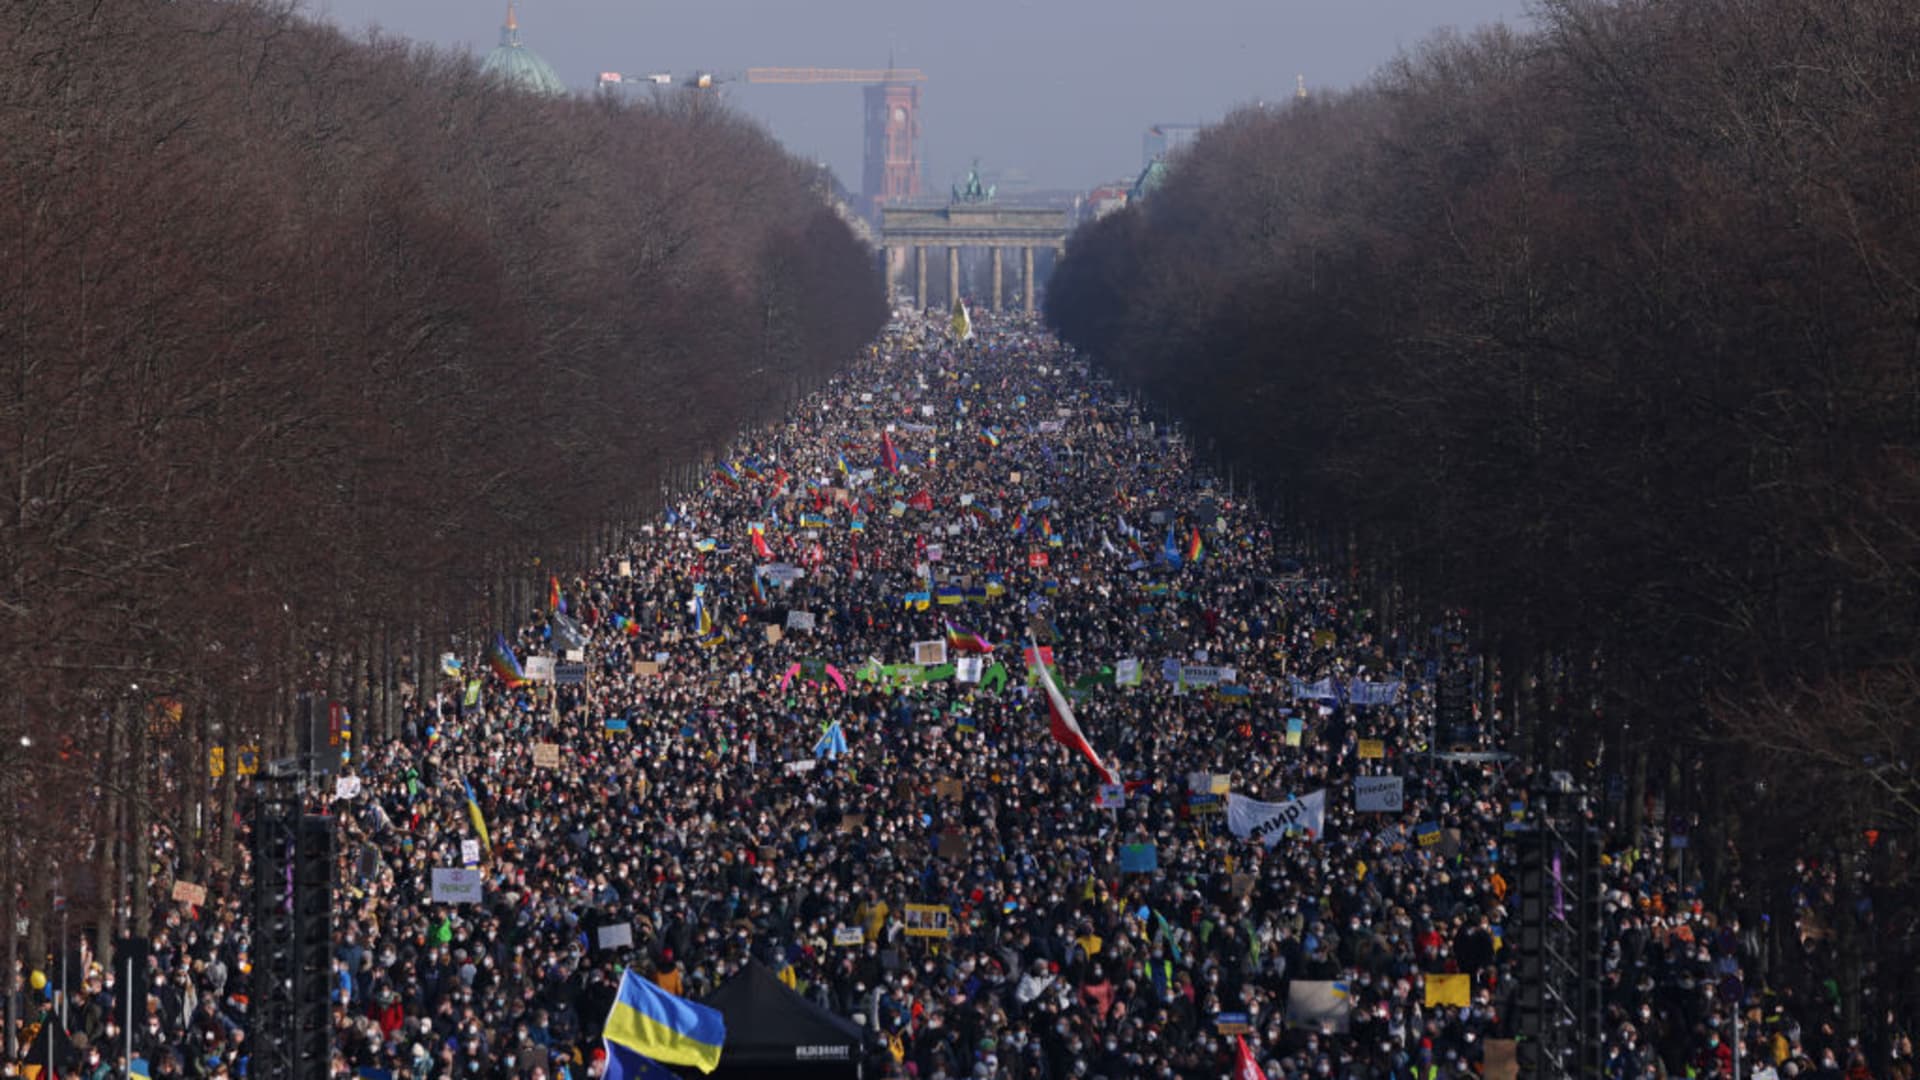 Tens of thousands of people gather in Tiergarten park to protest against the ongoing war in Ukraine on February 27, 2022 in Berlin, Germany.